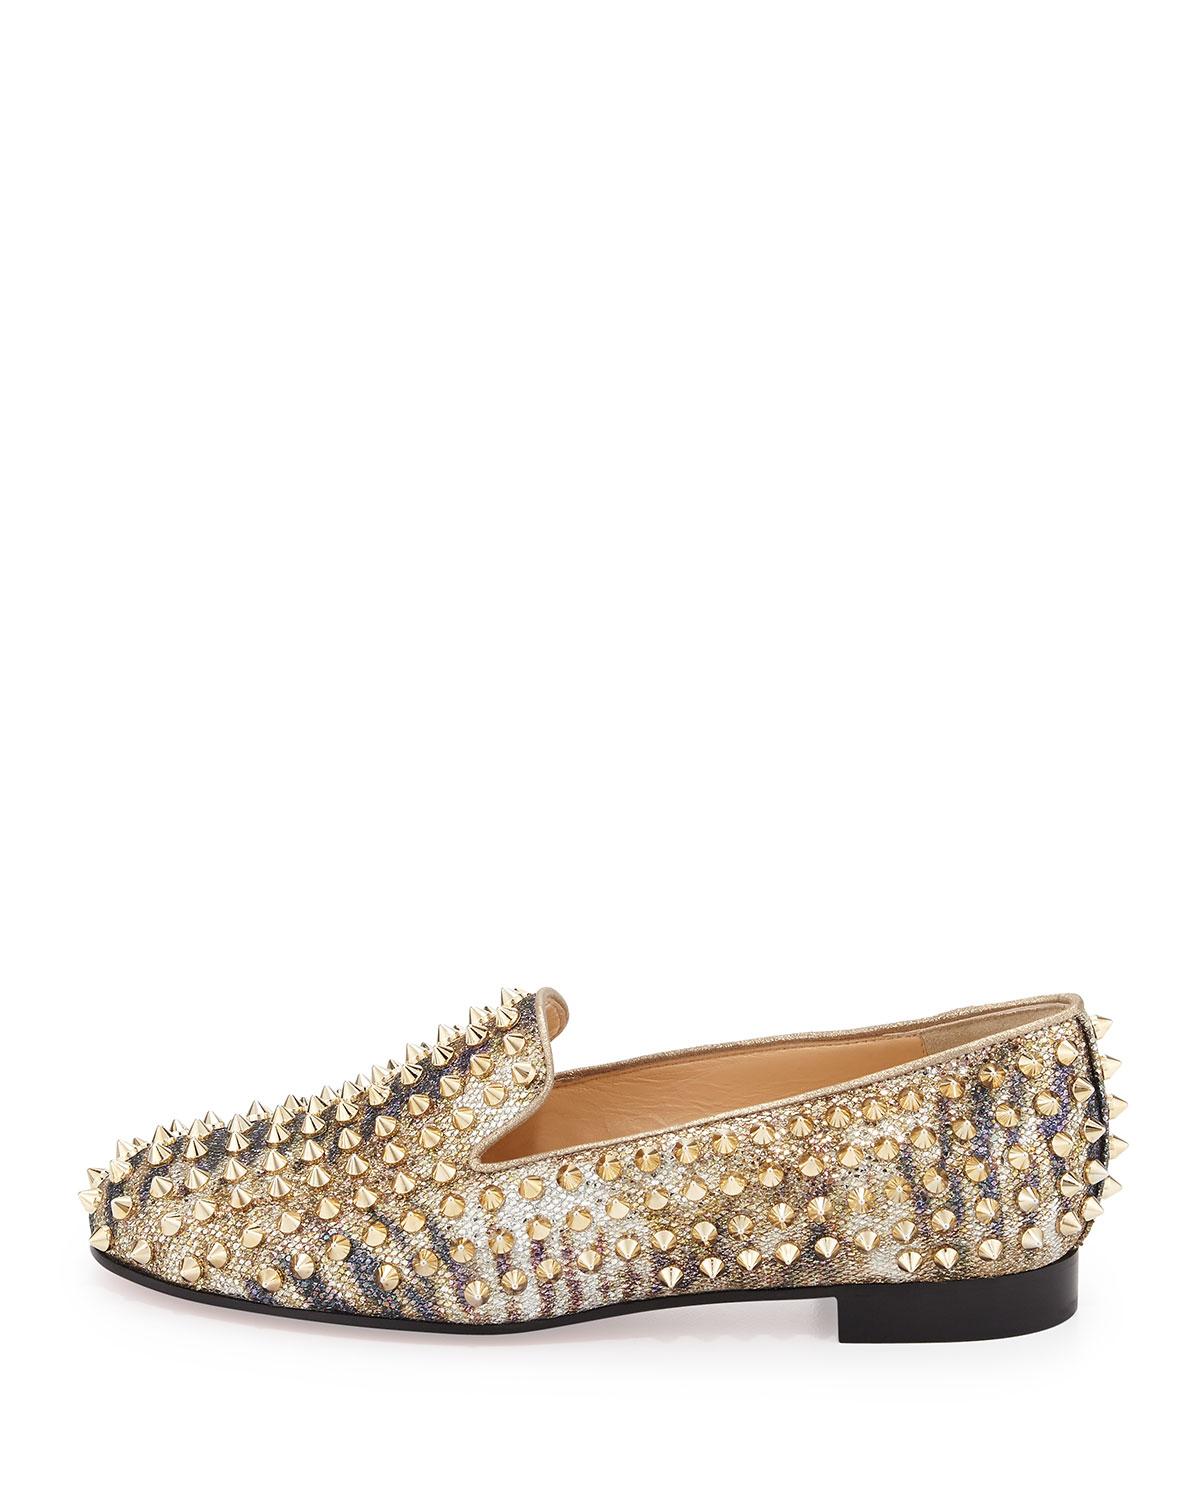 Christian Louboutin Rolling Spikes Glitter Loafer in Gold (LT GOLD) | Lyst